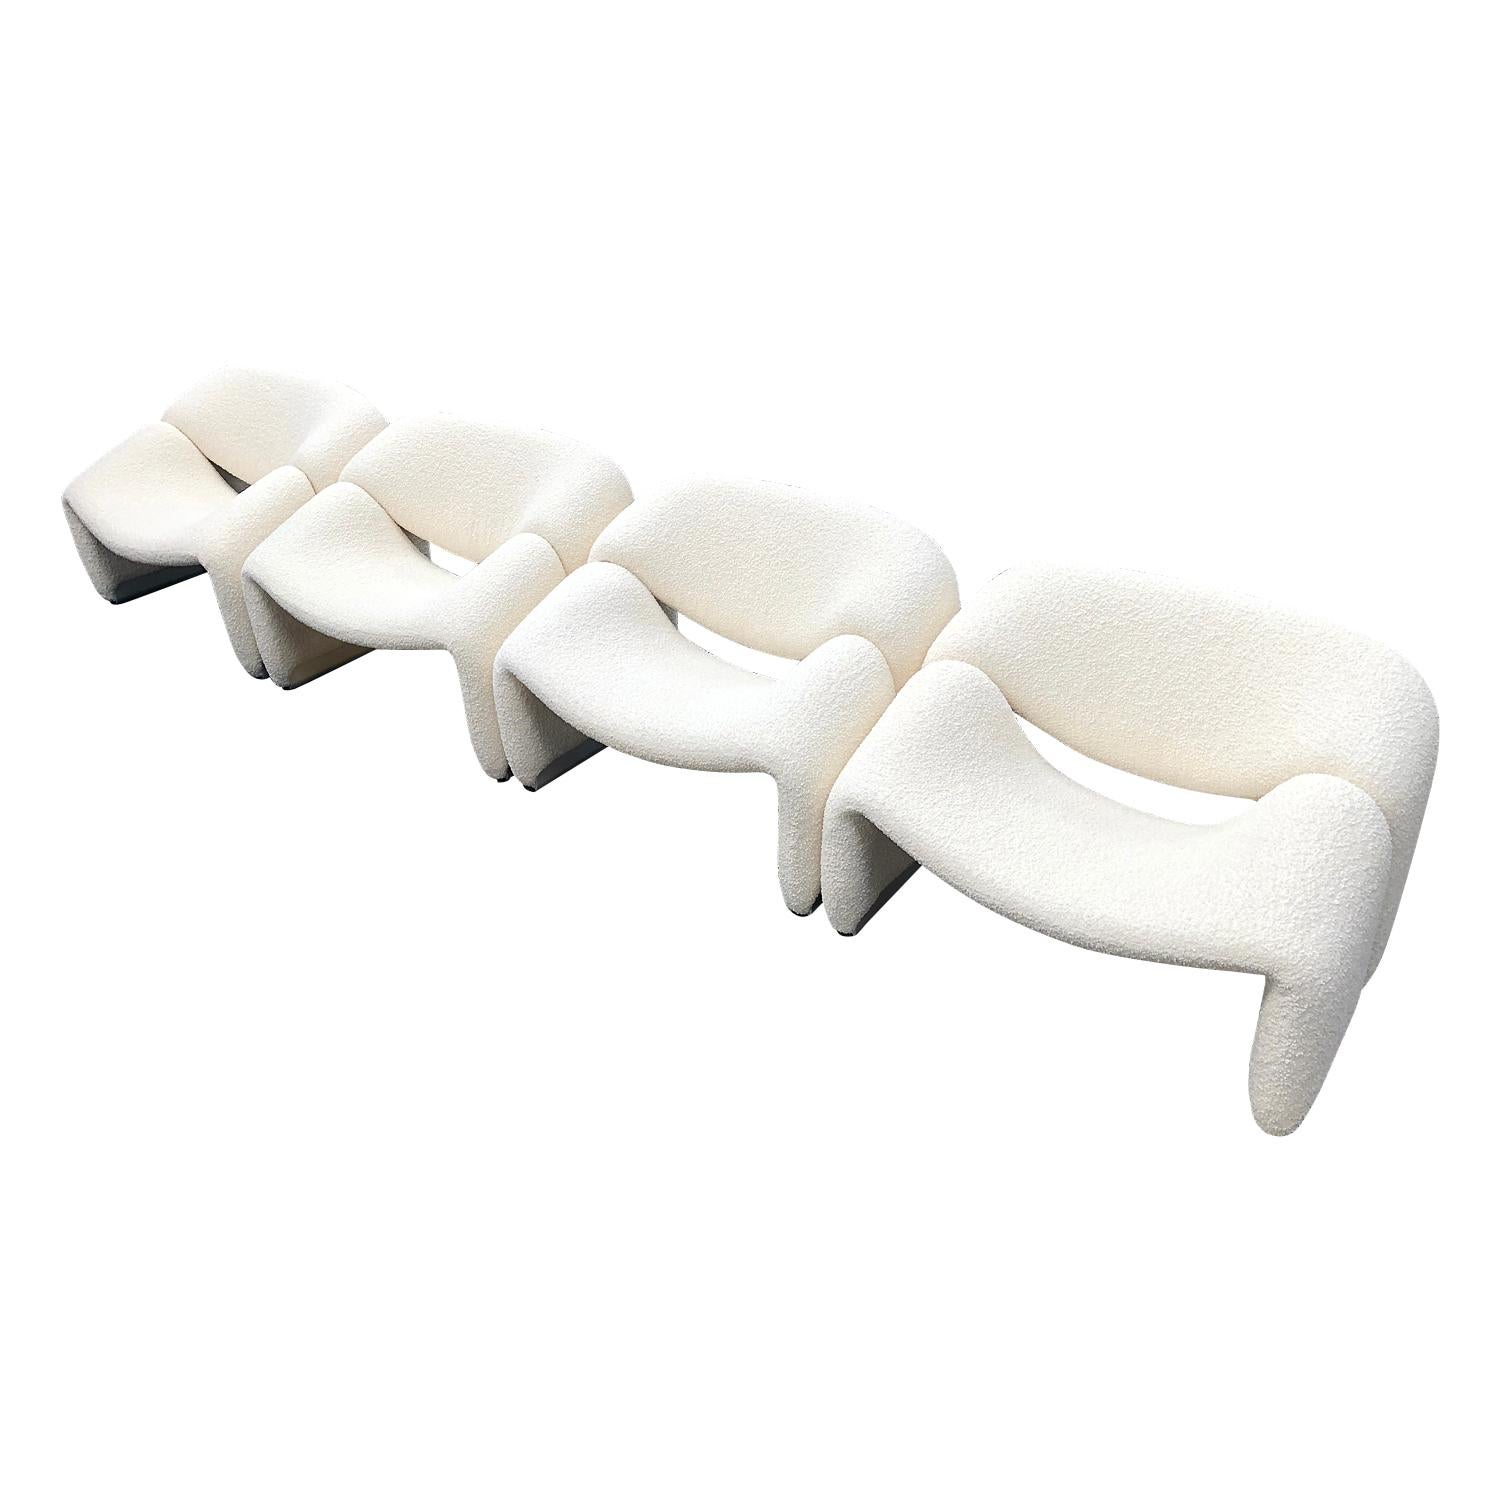 Pair of f598 ‘Groovy’ 'M' lounge chairs by Pierre Paulin for Artifort – Netherlands, 1972.
Price is per chair.

The chairs have been reupholstered in a beautiful off-white bouclé wool fabric from Paris. Black lacquered aluminum feet

Designer: